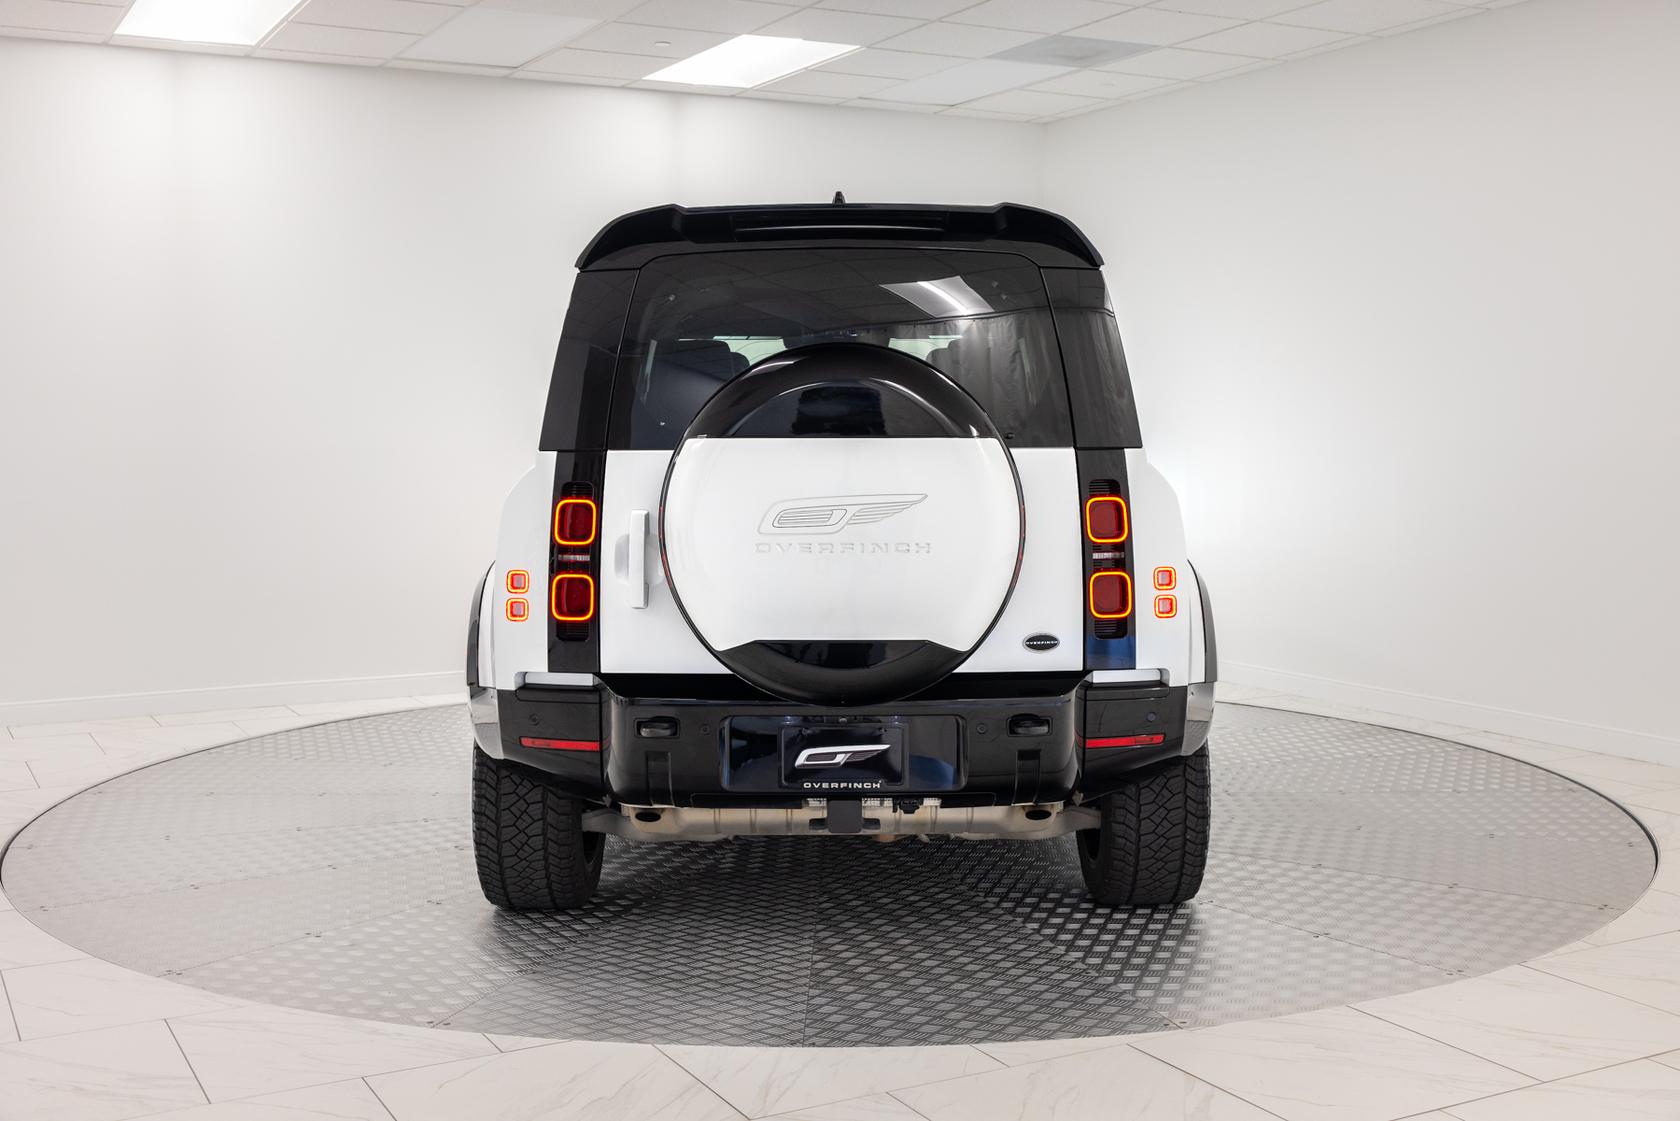 Used Land Rover DEFENDER 110 WHITE22DEF 4